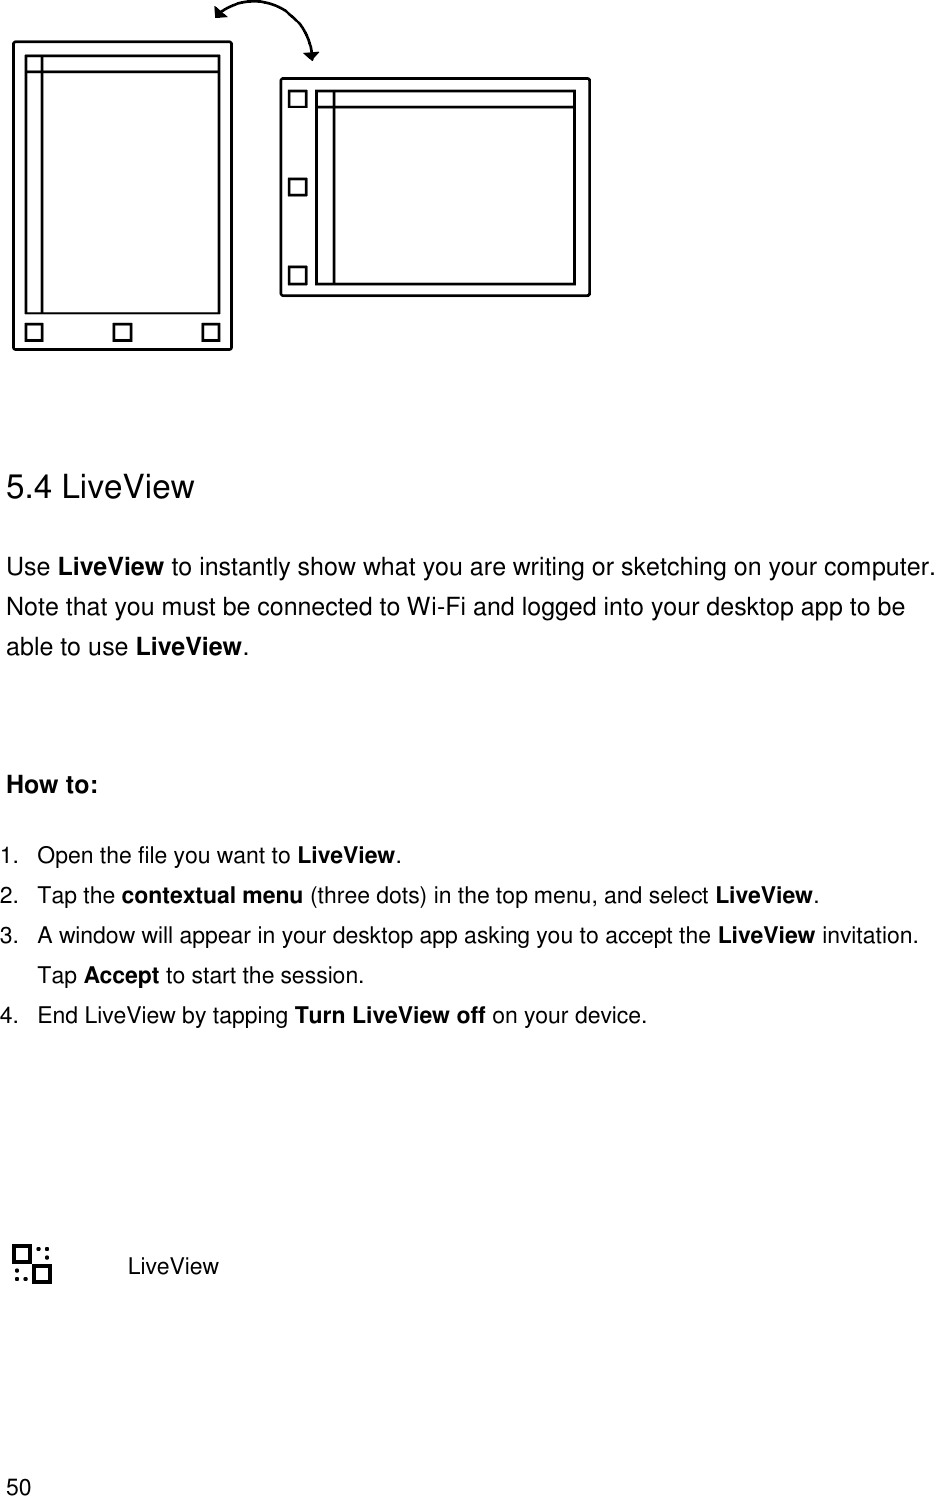 50    5.4 LiveView  Use LiveView to instantly show what you are writing or sketching on your computer. Note that you must be connected to Wi-Fi and logged into your desktop app to be able to use LiveView.   How to: 1.  Open the file you want to LiveView.  2.  Tap the contextual menu (three dots) in the top menu, and select LiveView.  3.  A window will appear in your desktop app asking you to accept the LiveView invitation. Tap Accept to start the session.  4.  End LiveView by tapping Turn LiveView off on your device.                LiveView    